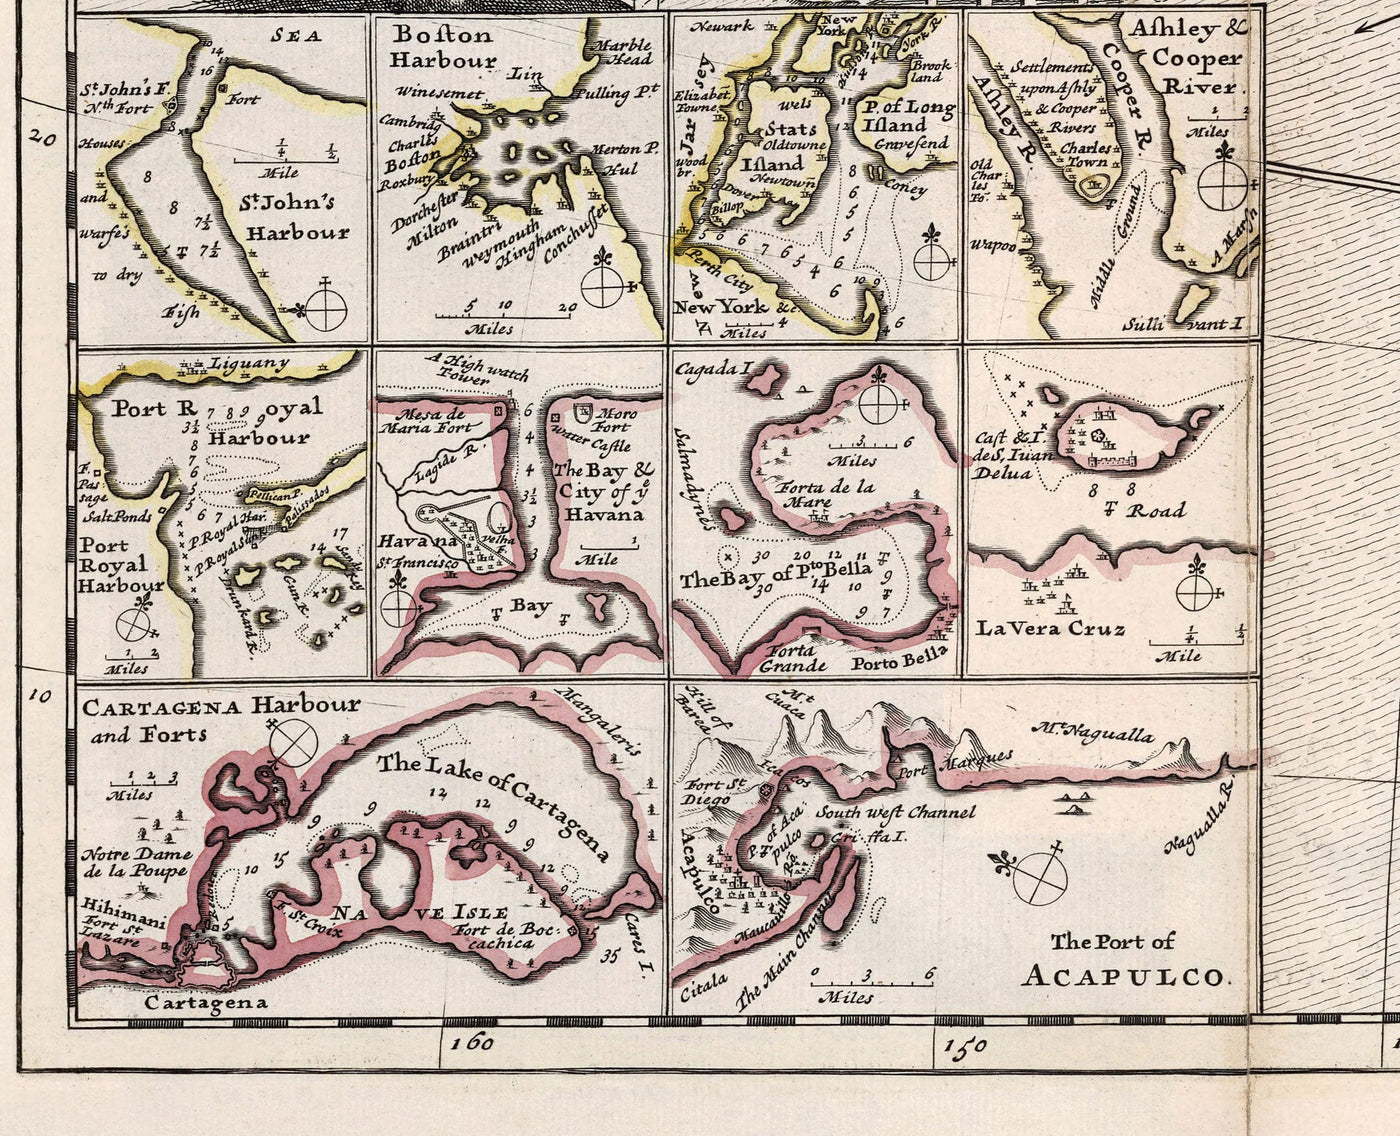 Old Map of North America, 1719 by Herman Moll - USA, Canada, Mexico, Caribbean, Latin, Atlantic, Pacific - The 'Codfish Map'